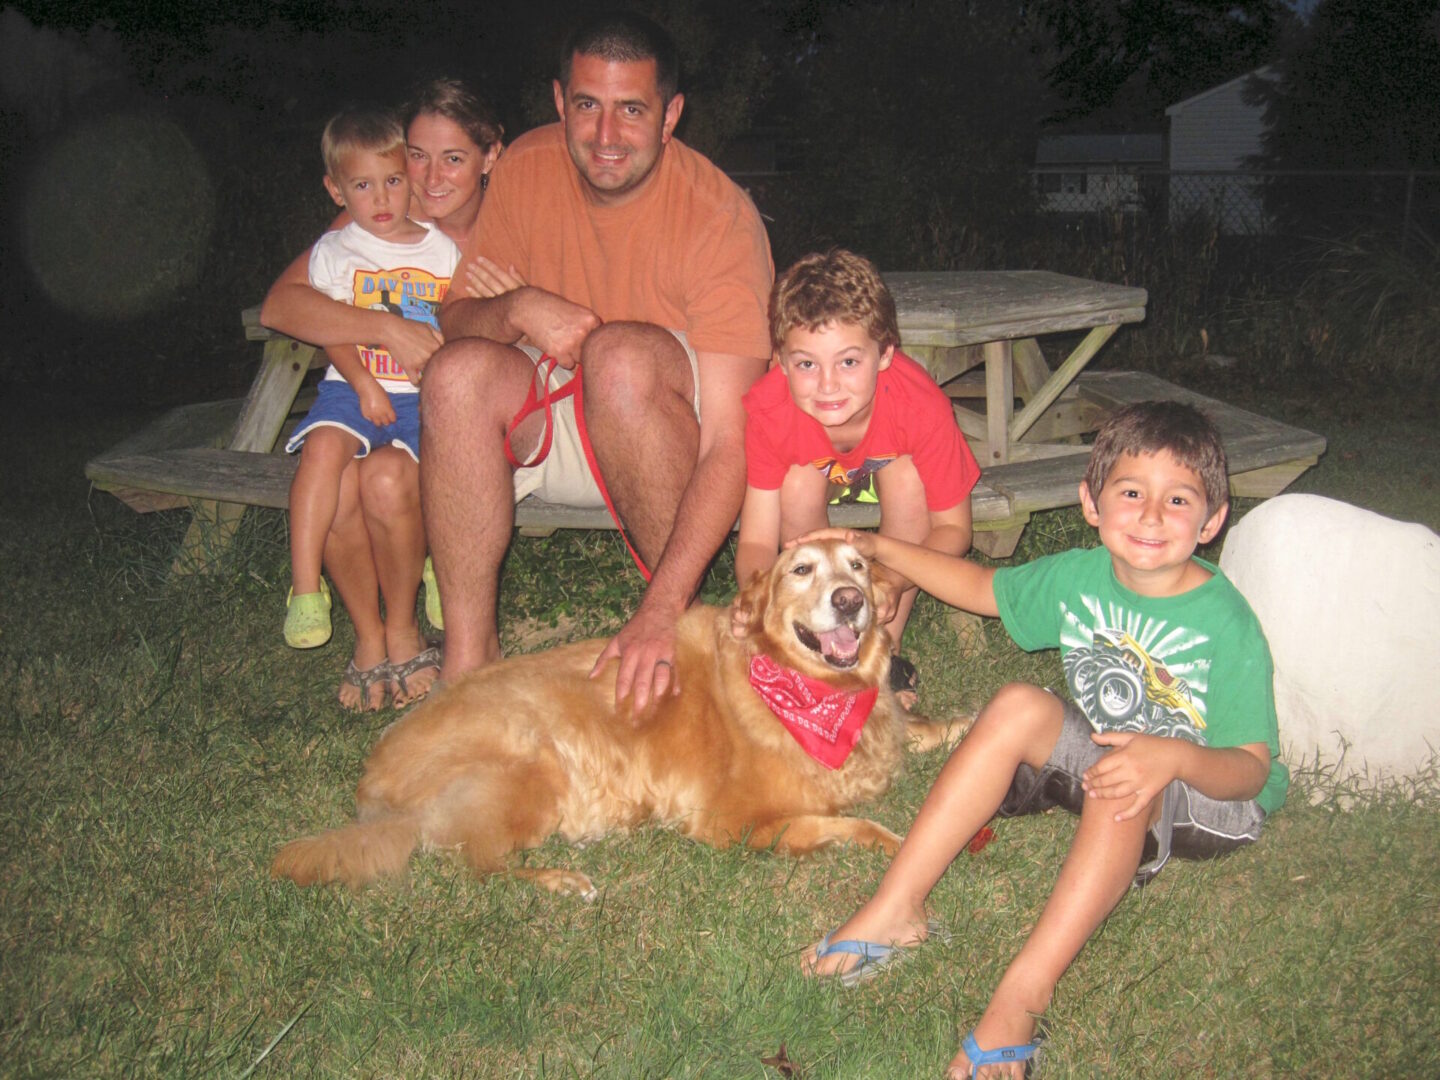 A family with three children and a golden retriever dog posing together outdoors at dusk.